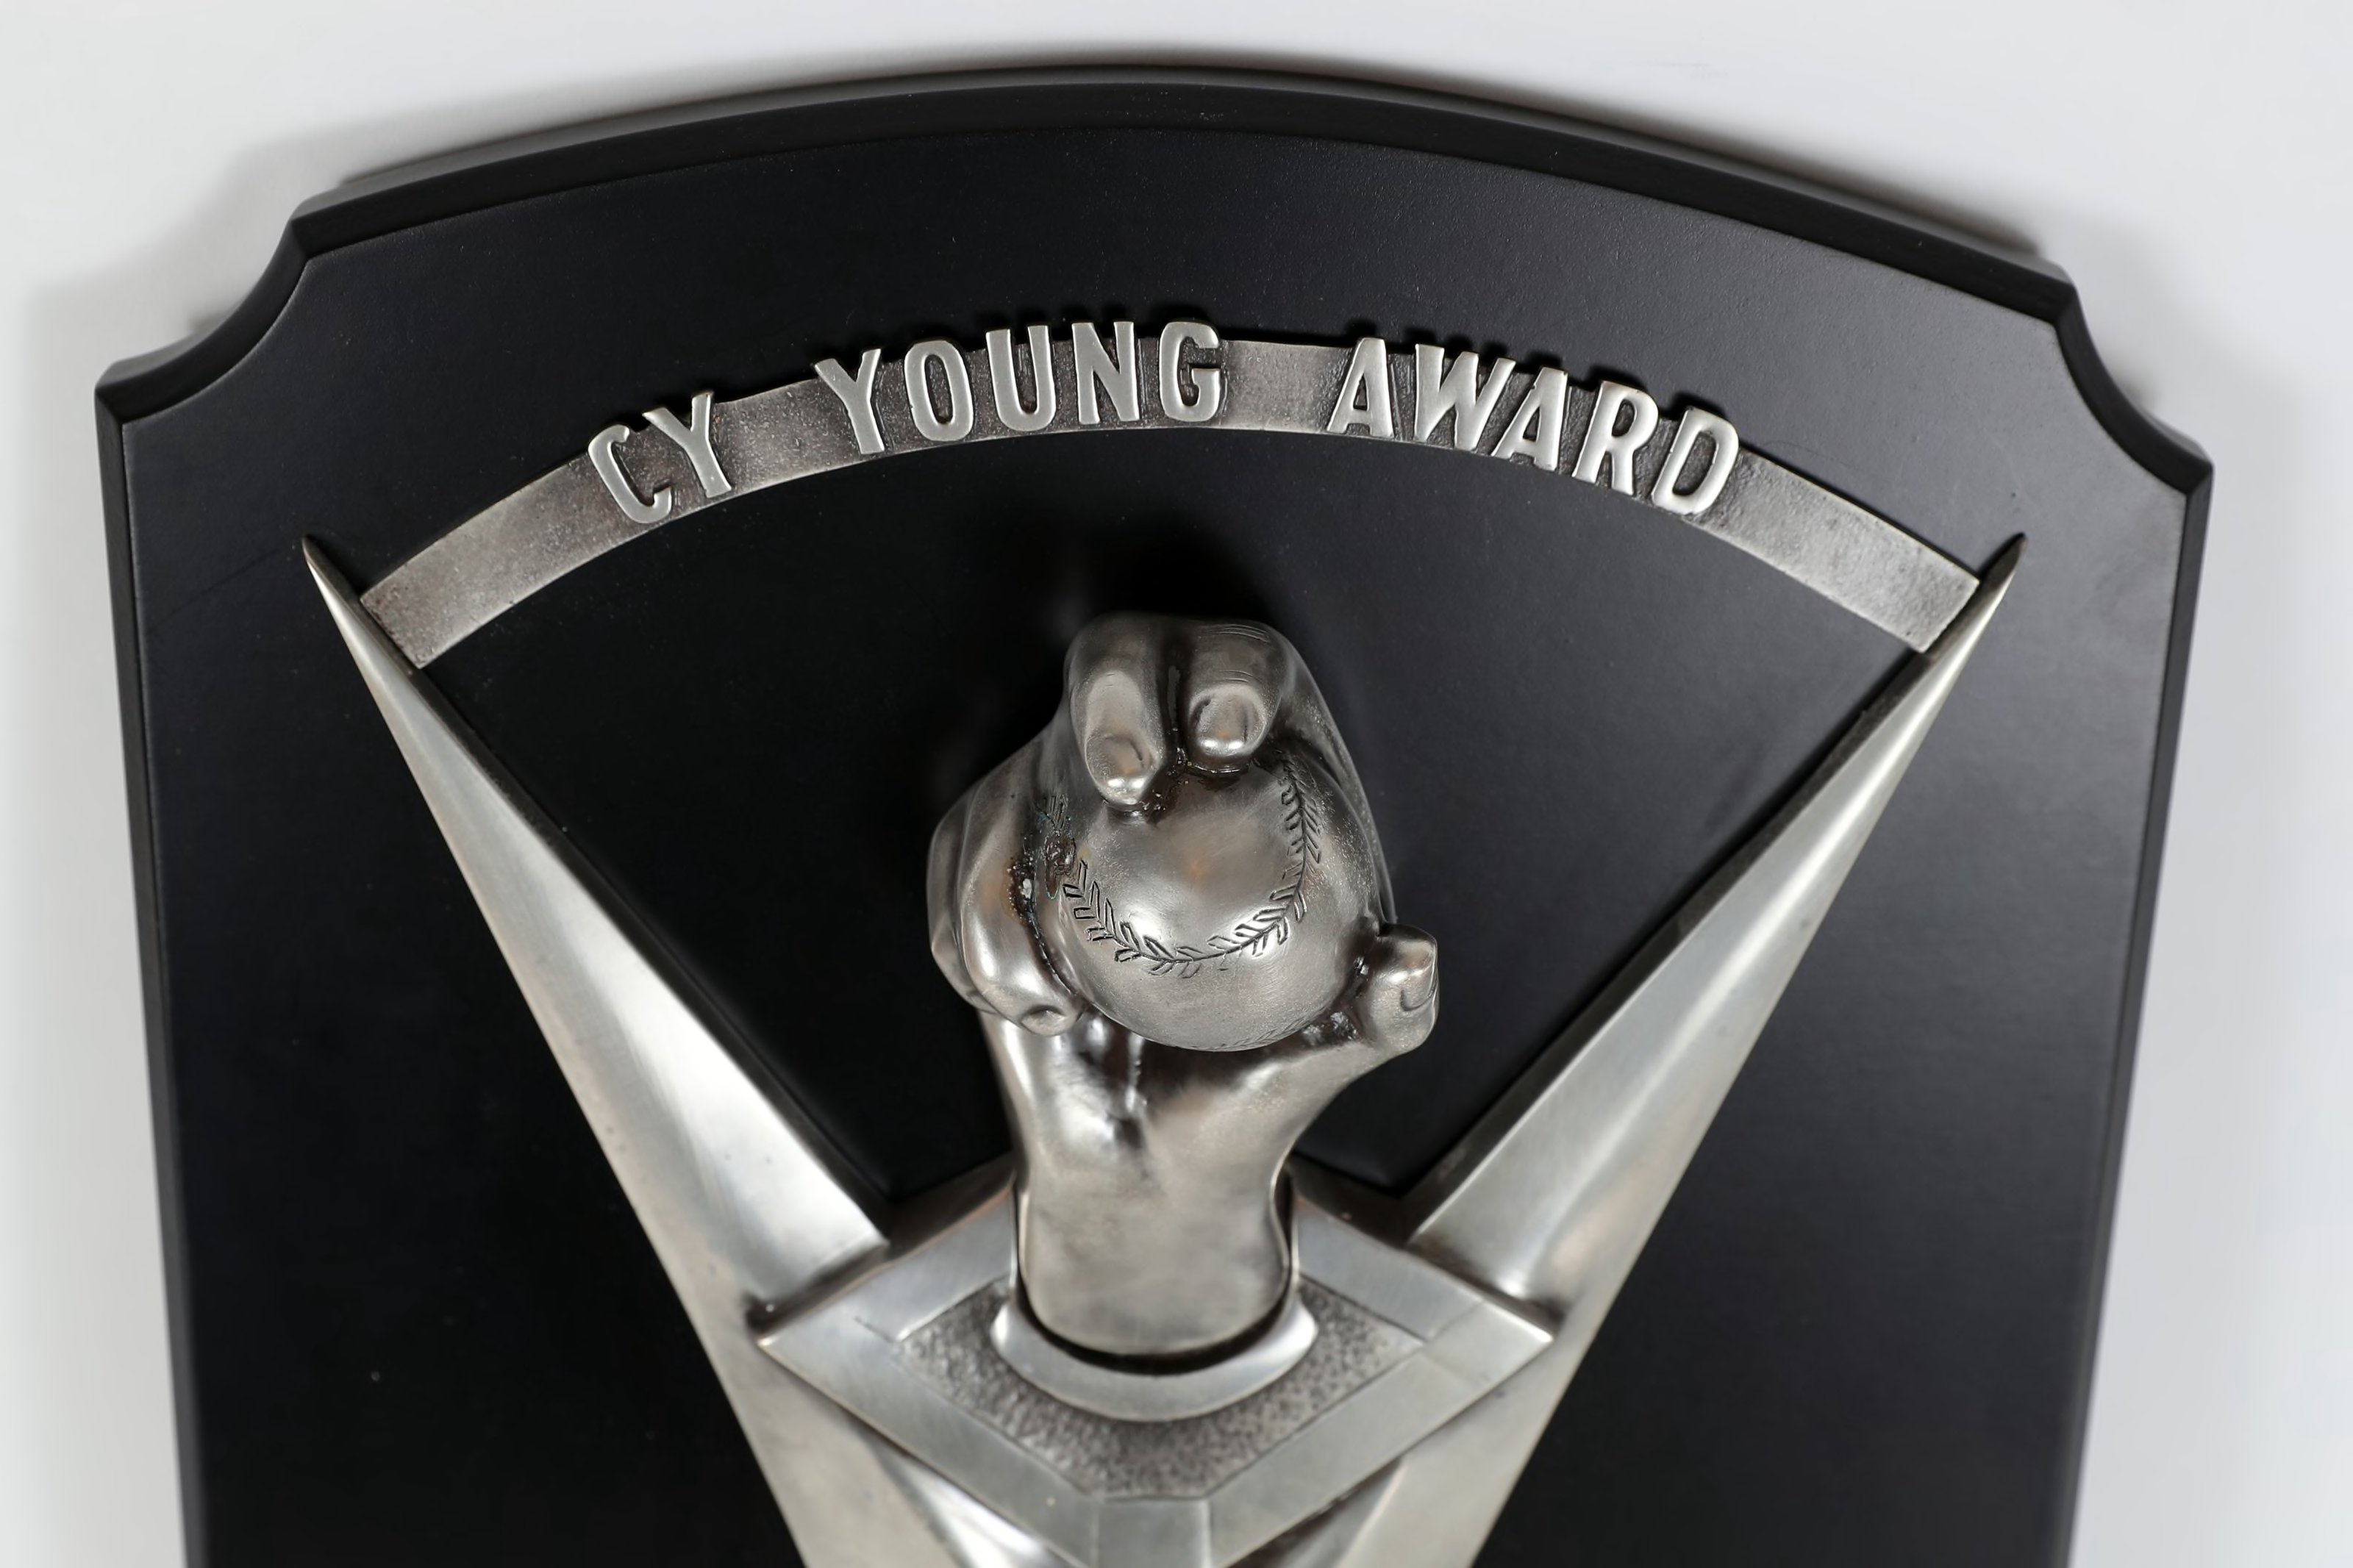 For your WAY too early consideration Cy Young Award